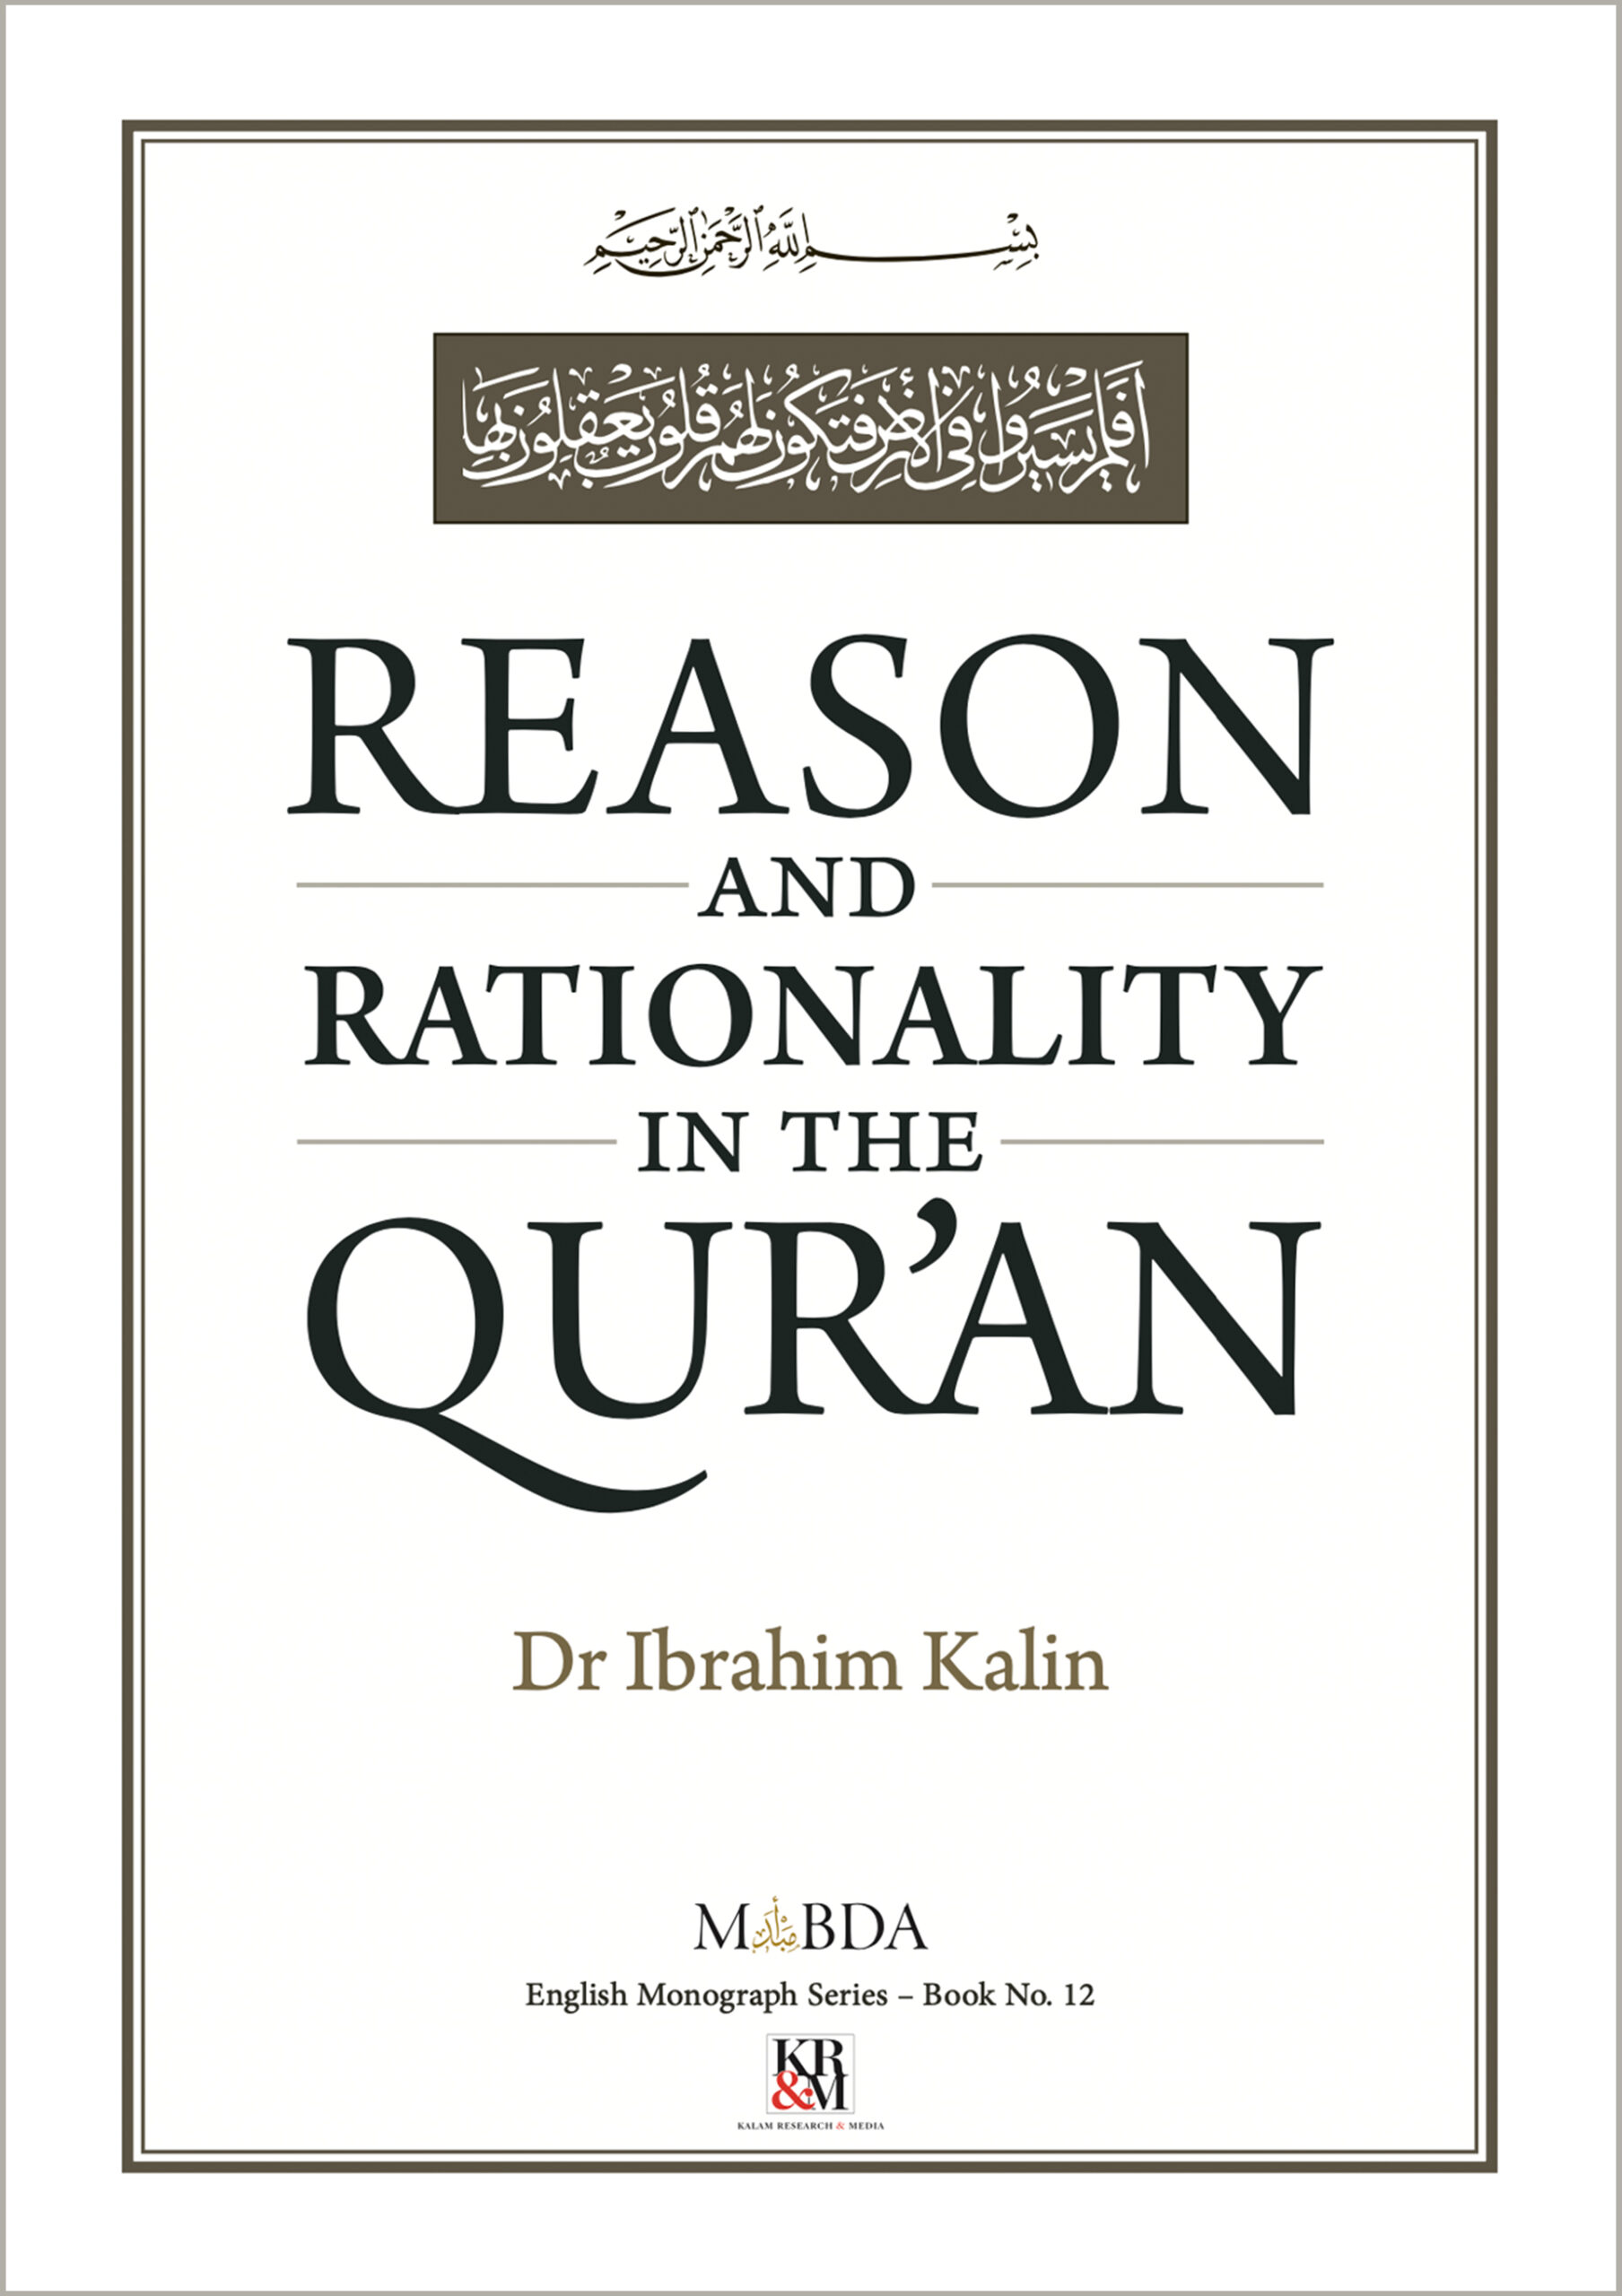 Reason and Rationality in the Qur’an